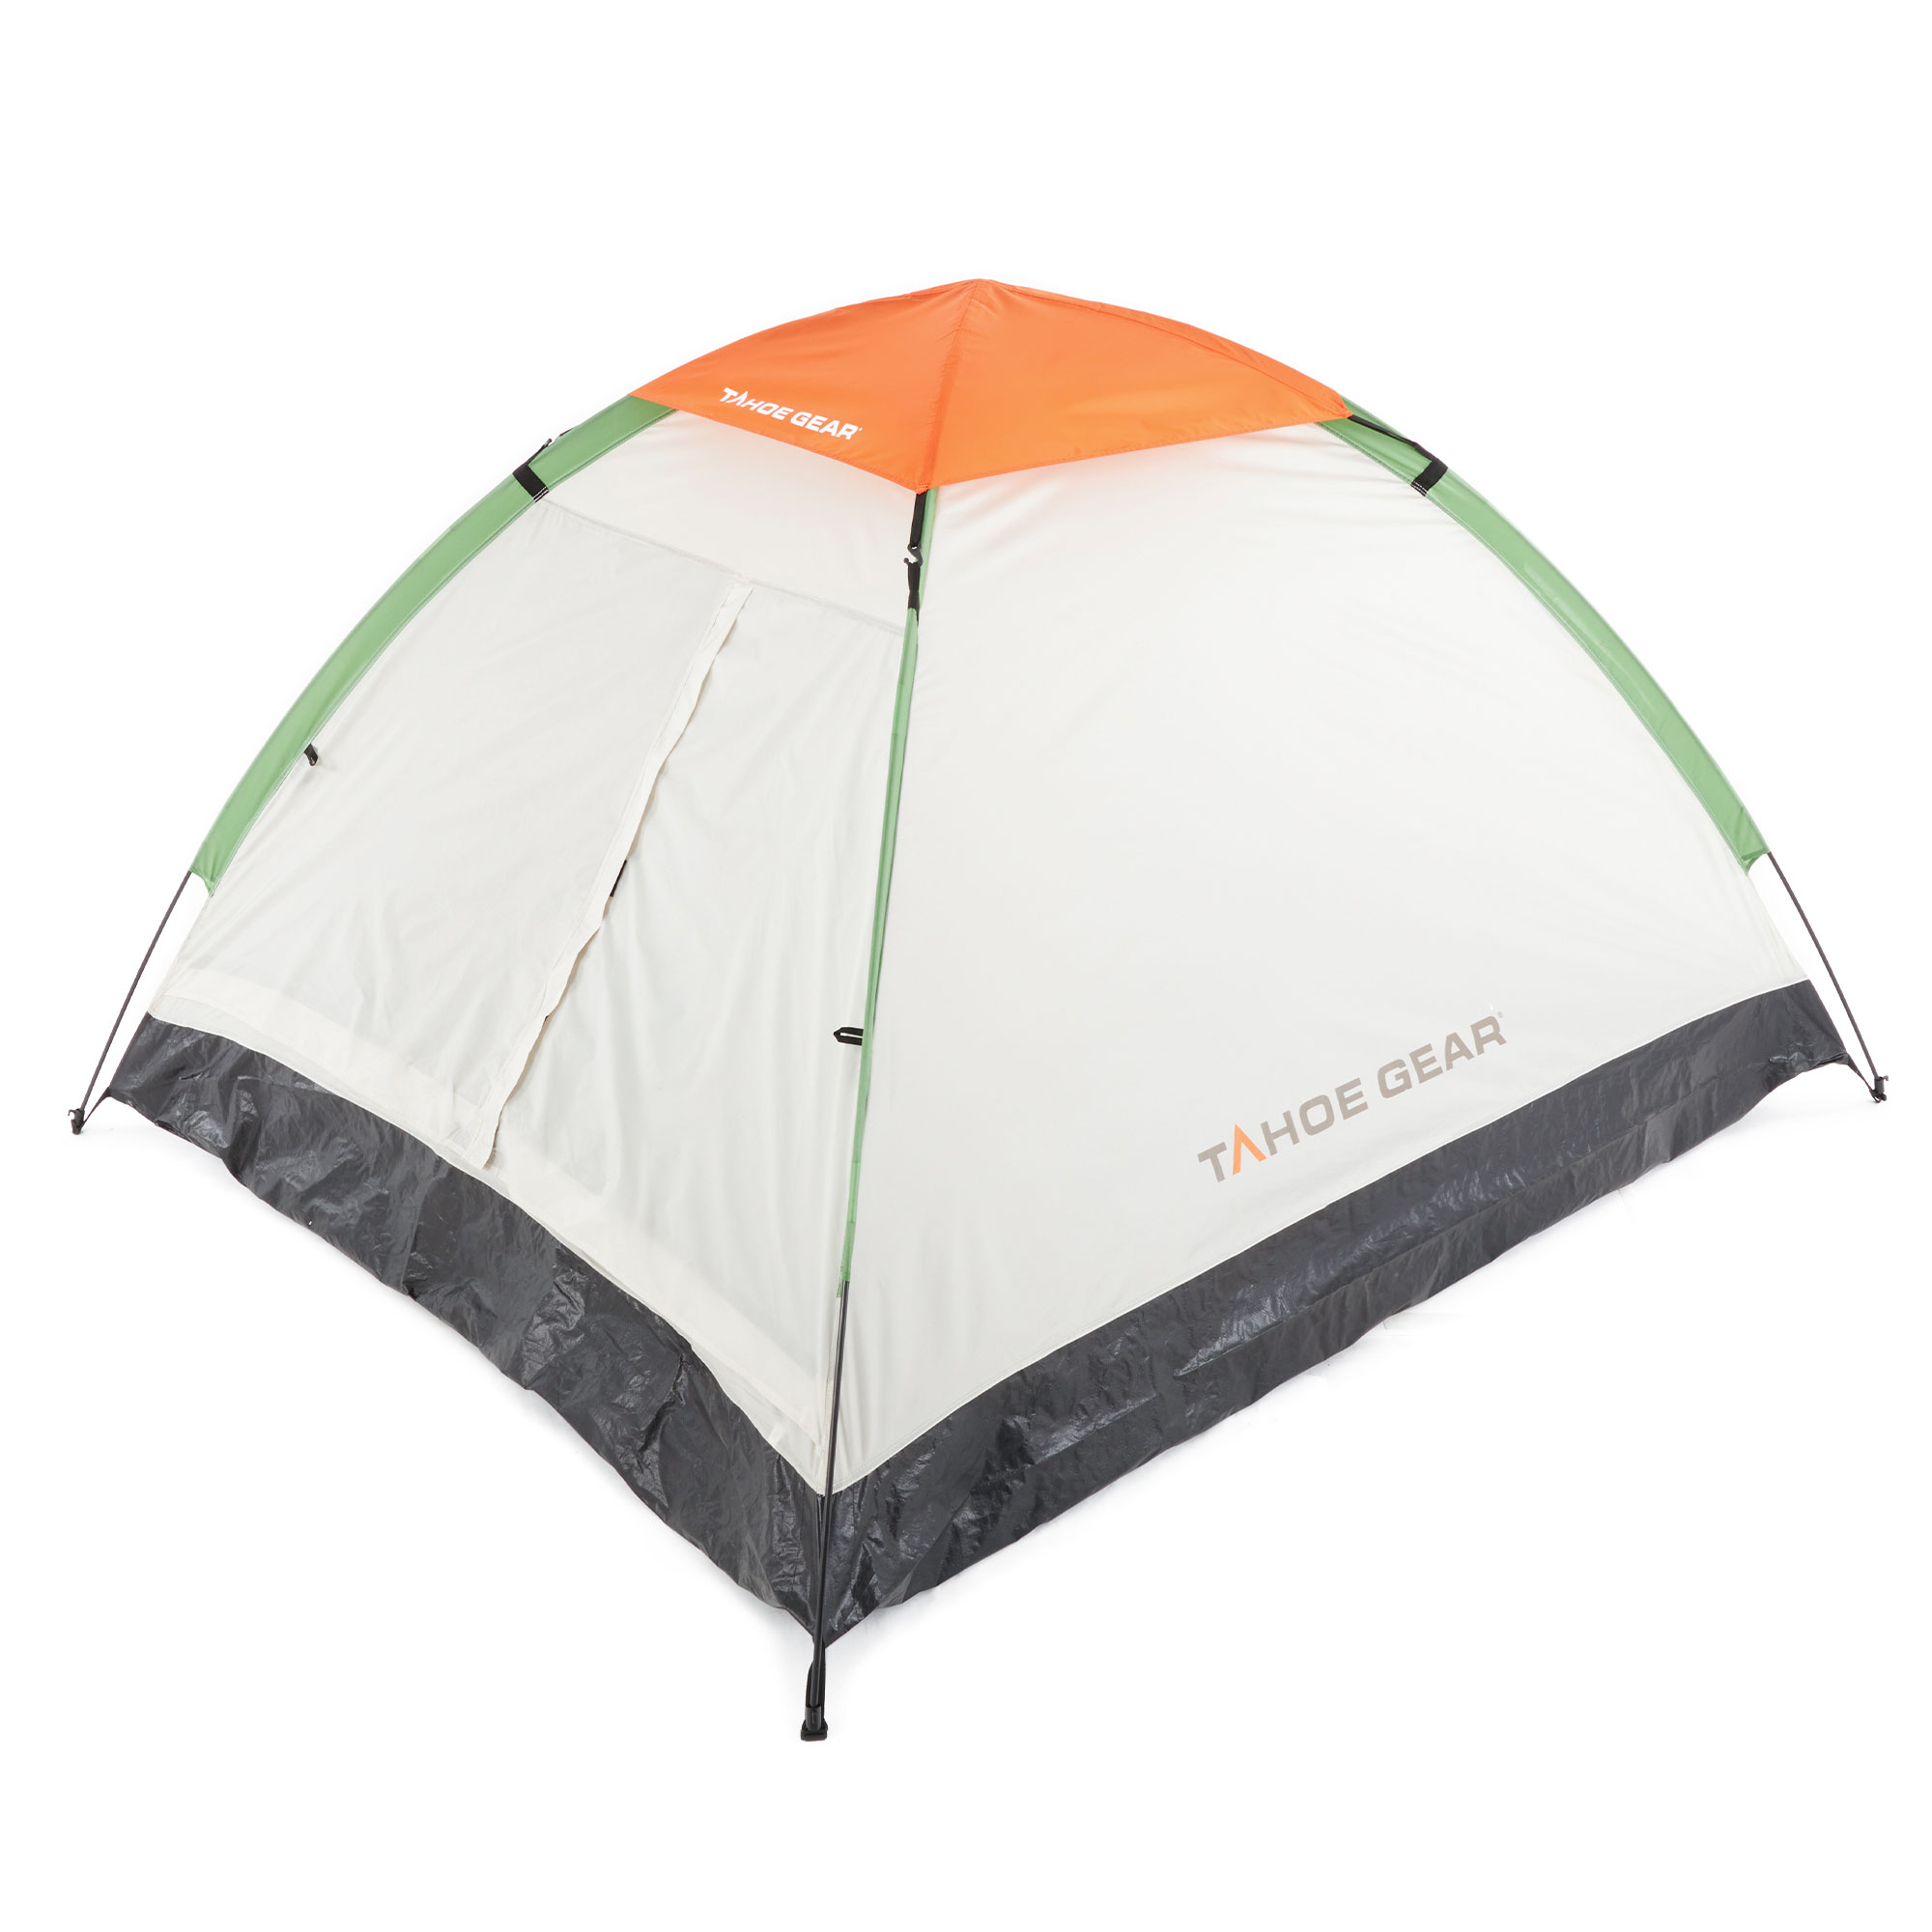 Tahoe Gear Willow 2 Person 3 Season Dome Waterproof Camping Hiking Tent